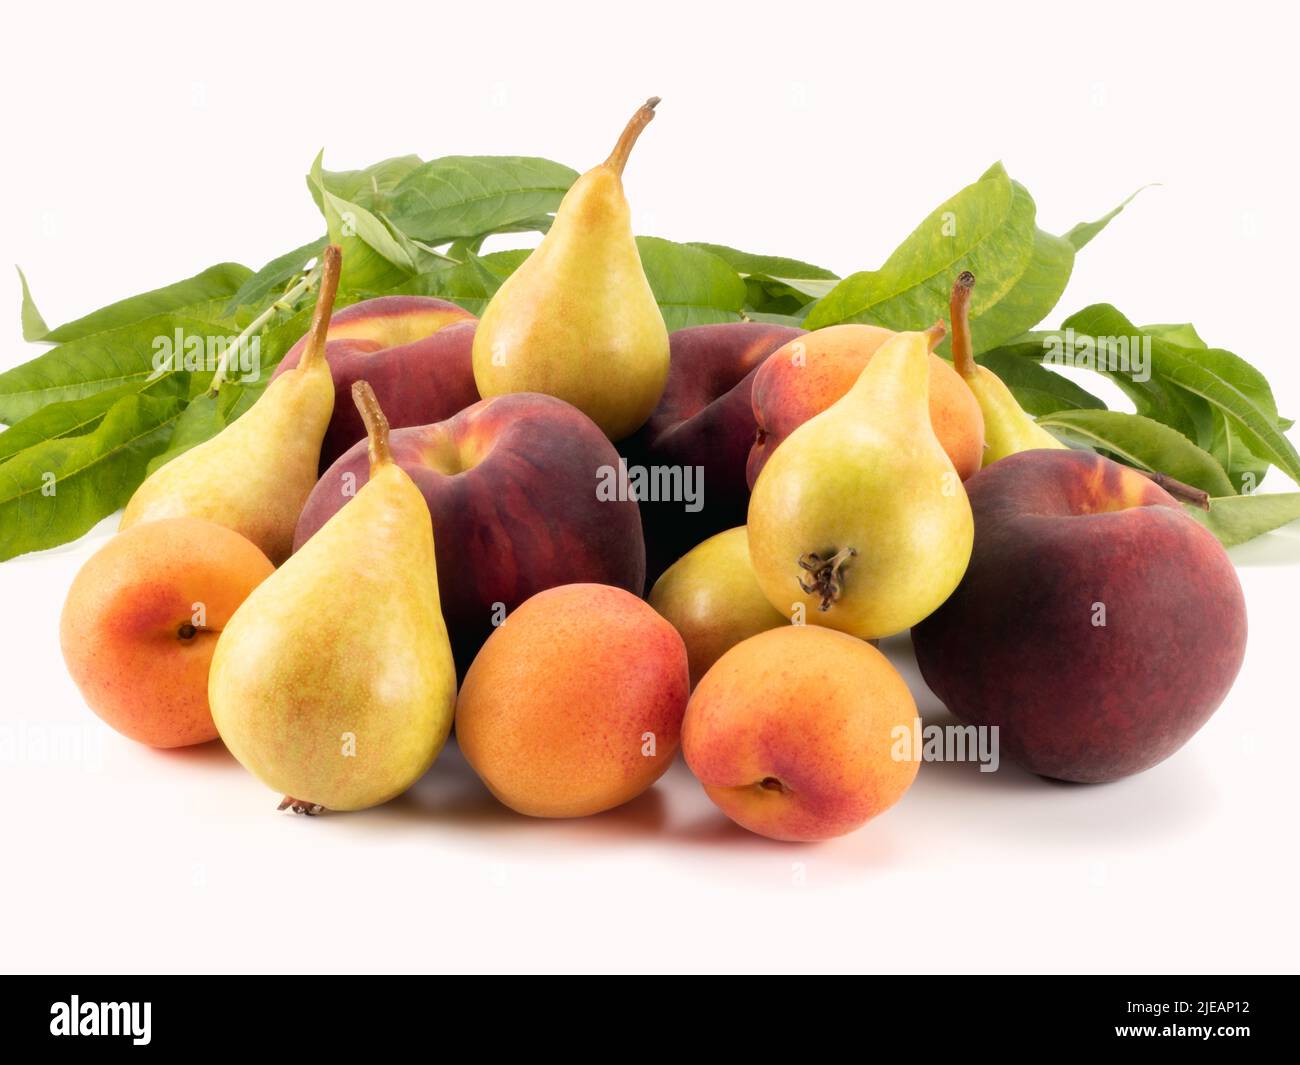 Fresh seasonal fruit. Apricot, peach  and pears isolated on bright background. Close up view. Stock Photo